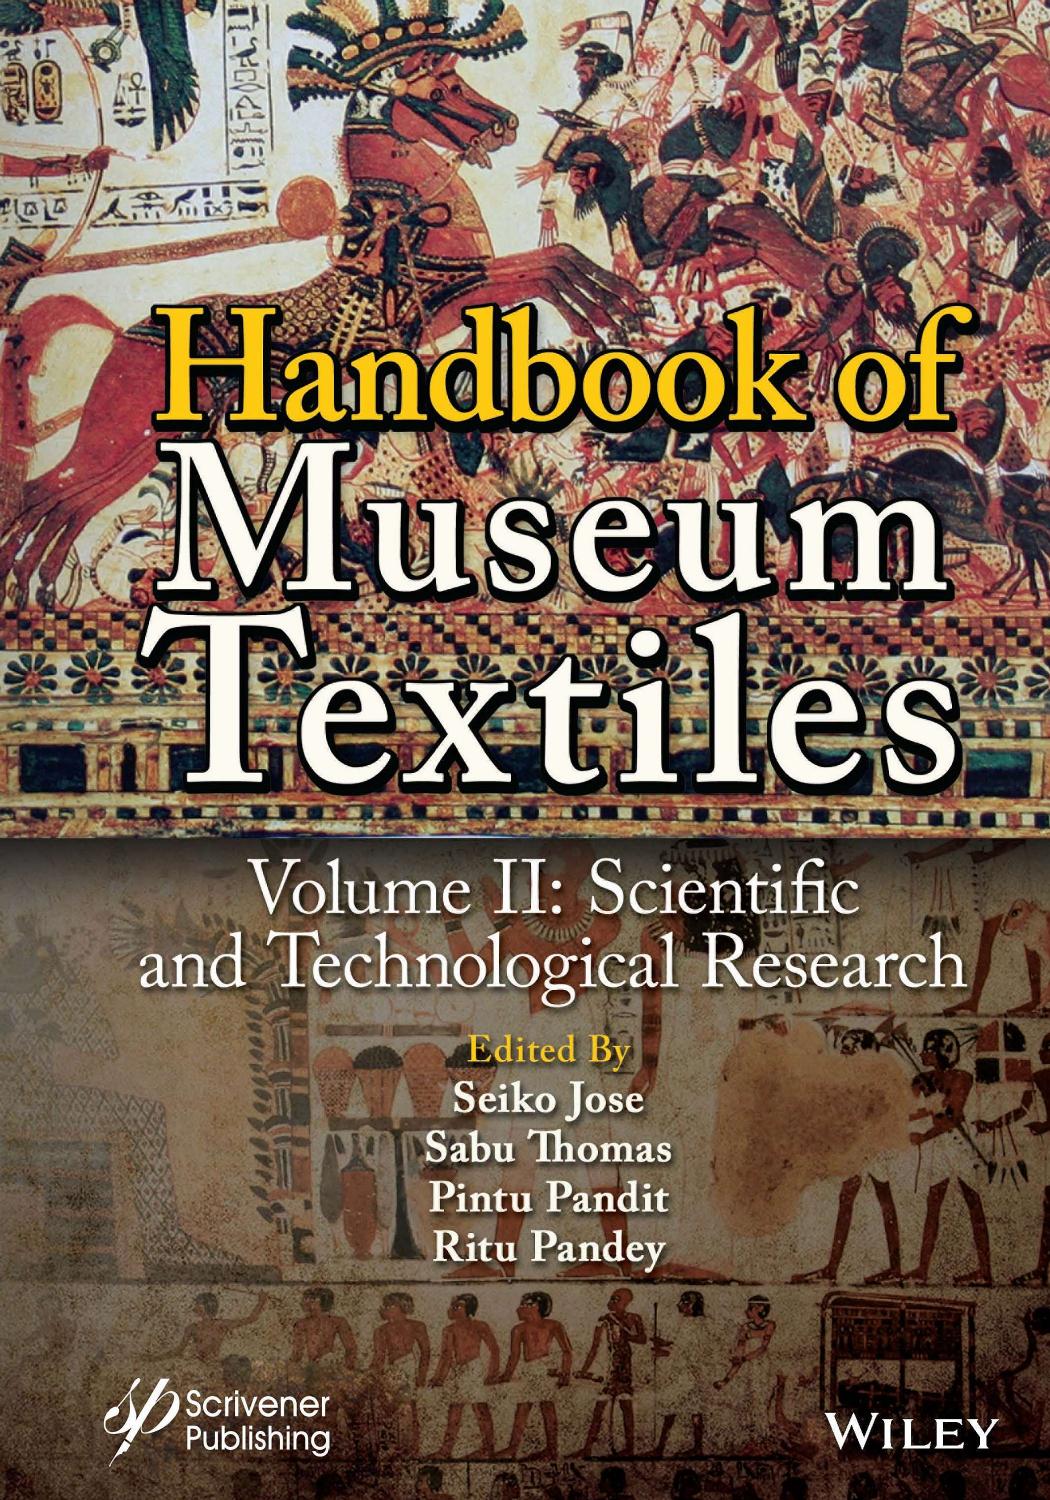 Handbook of Museum Textiles: Volume II Scientific and Technological Research